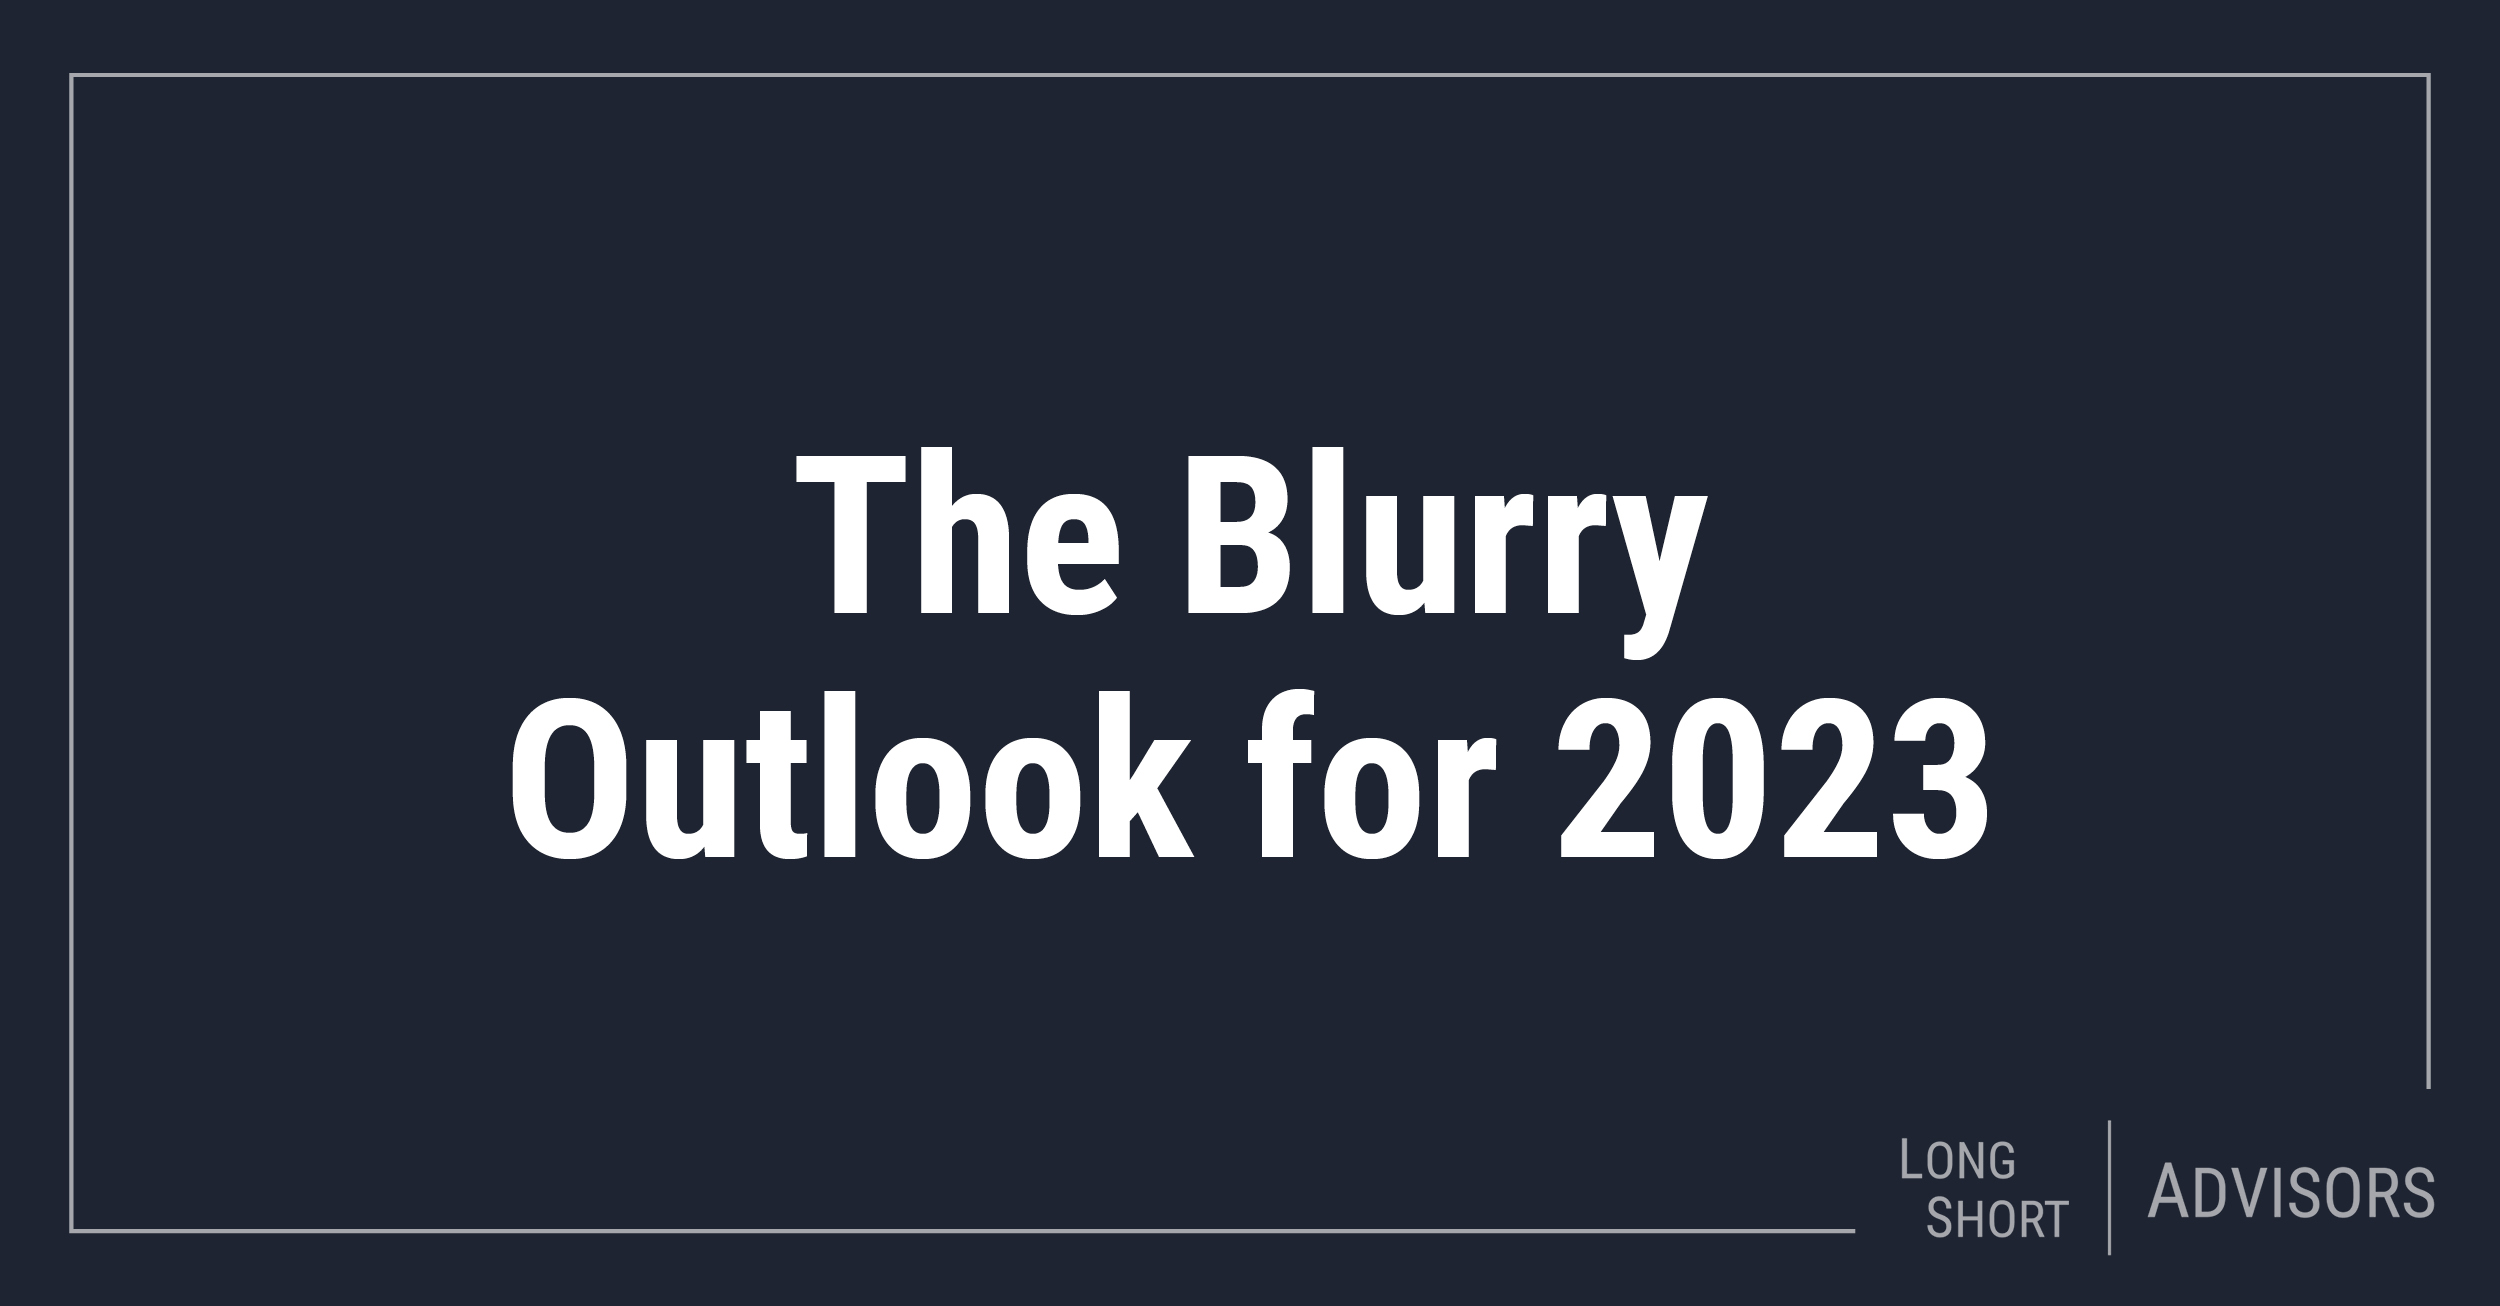 The Blurry Outlook for 2023